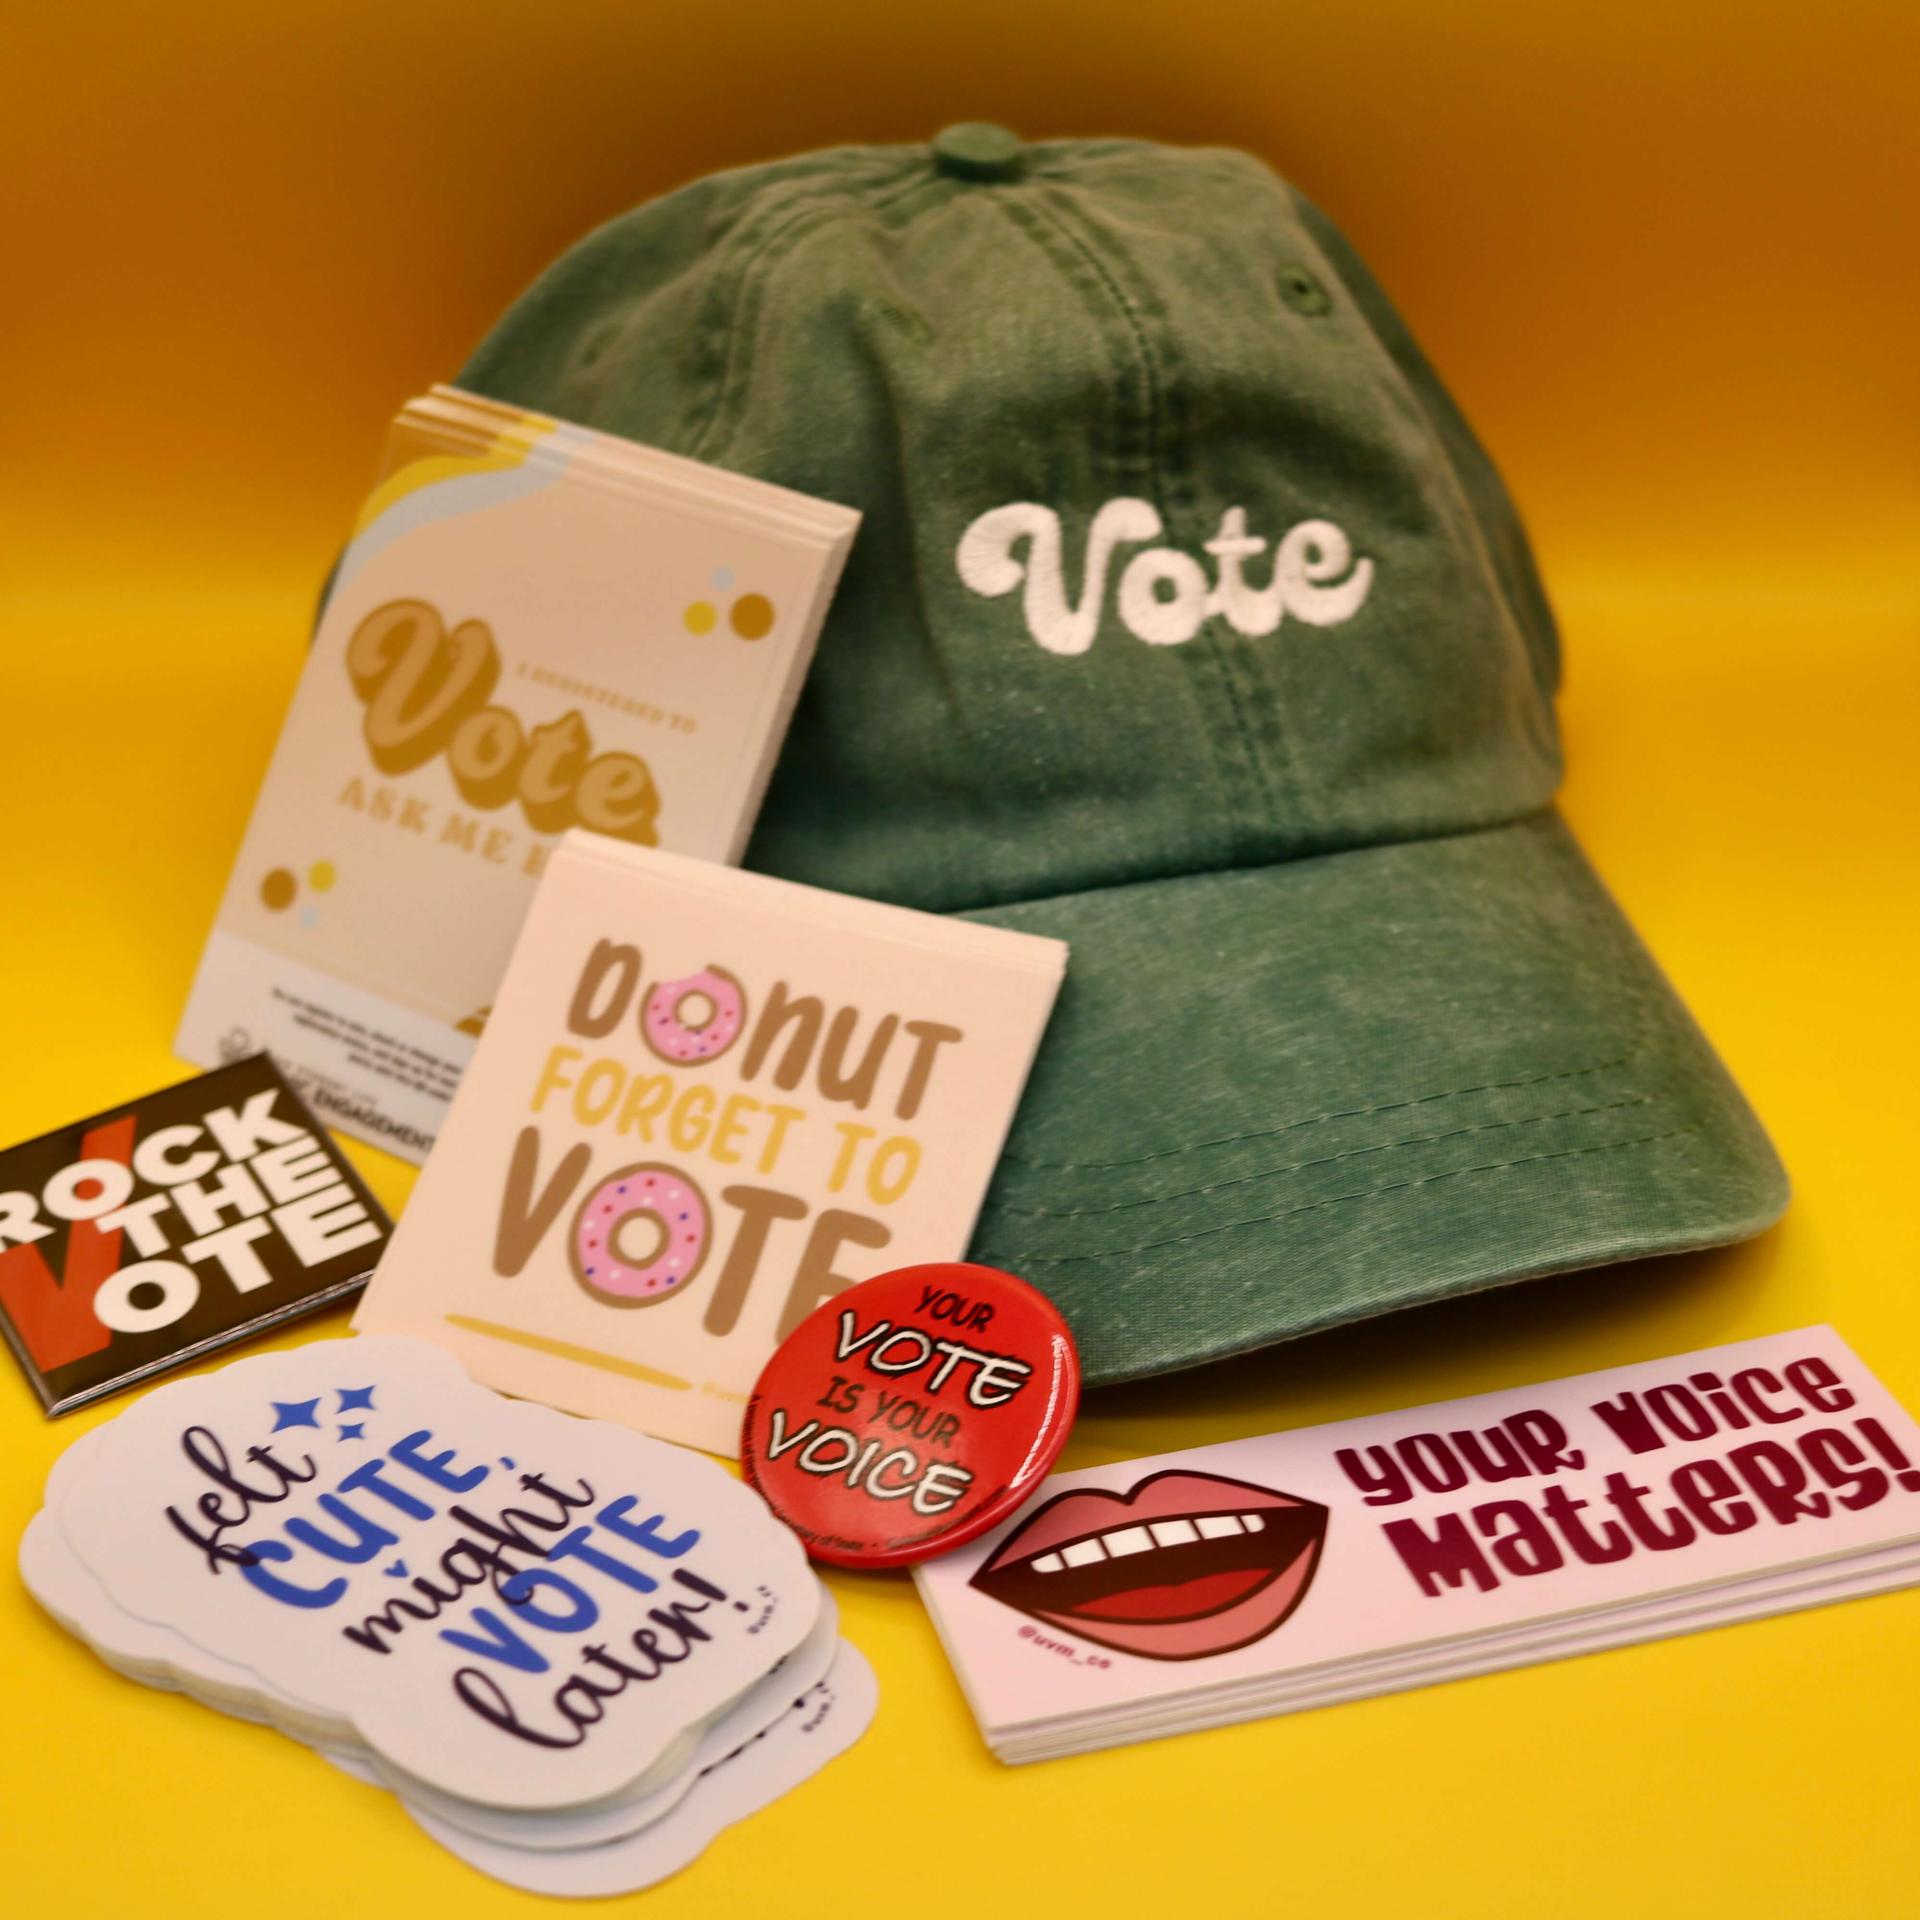 A collection of stickers, buttons and hats designed as part of Civic Engagement's Voter Education campaign, displayed in front of a yellow background